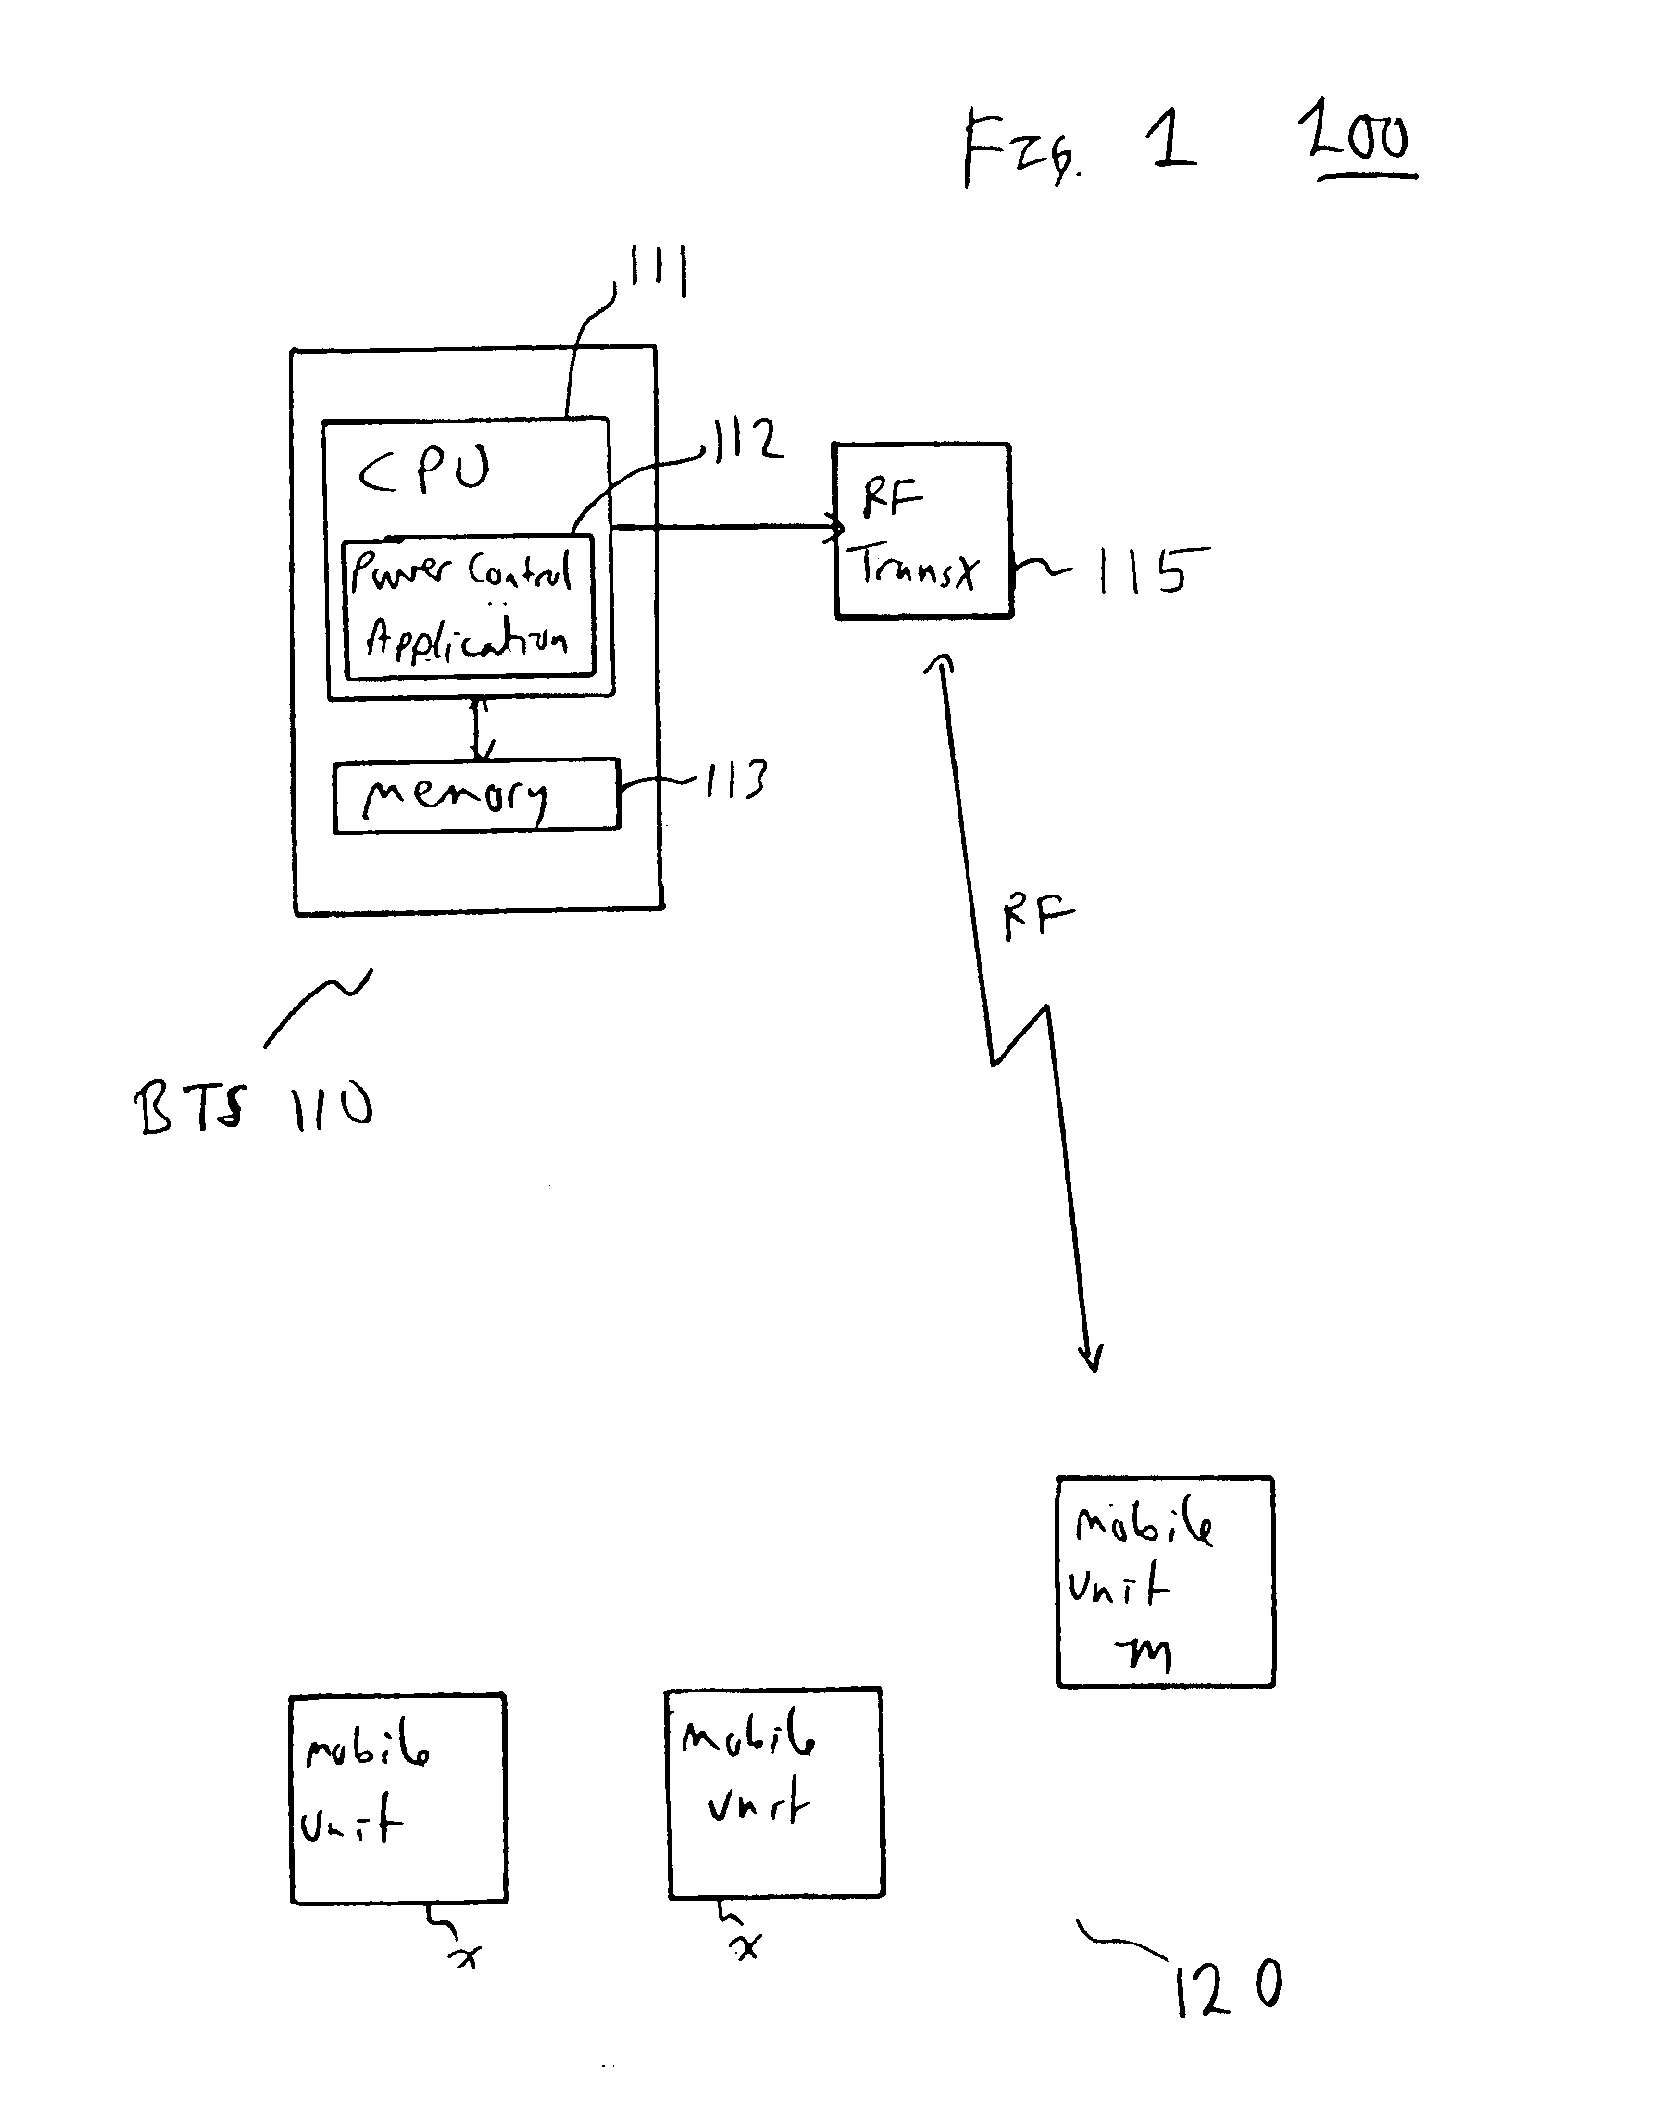 Downlink power control method for wireless packet data network